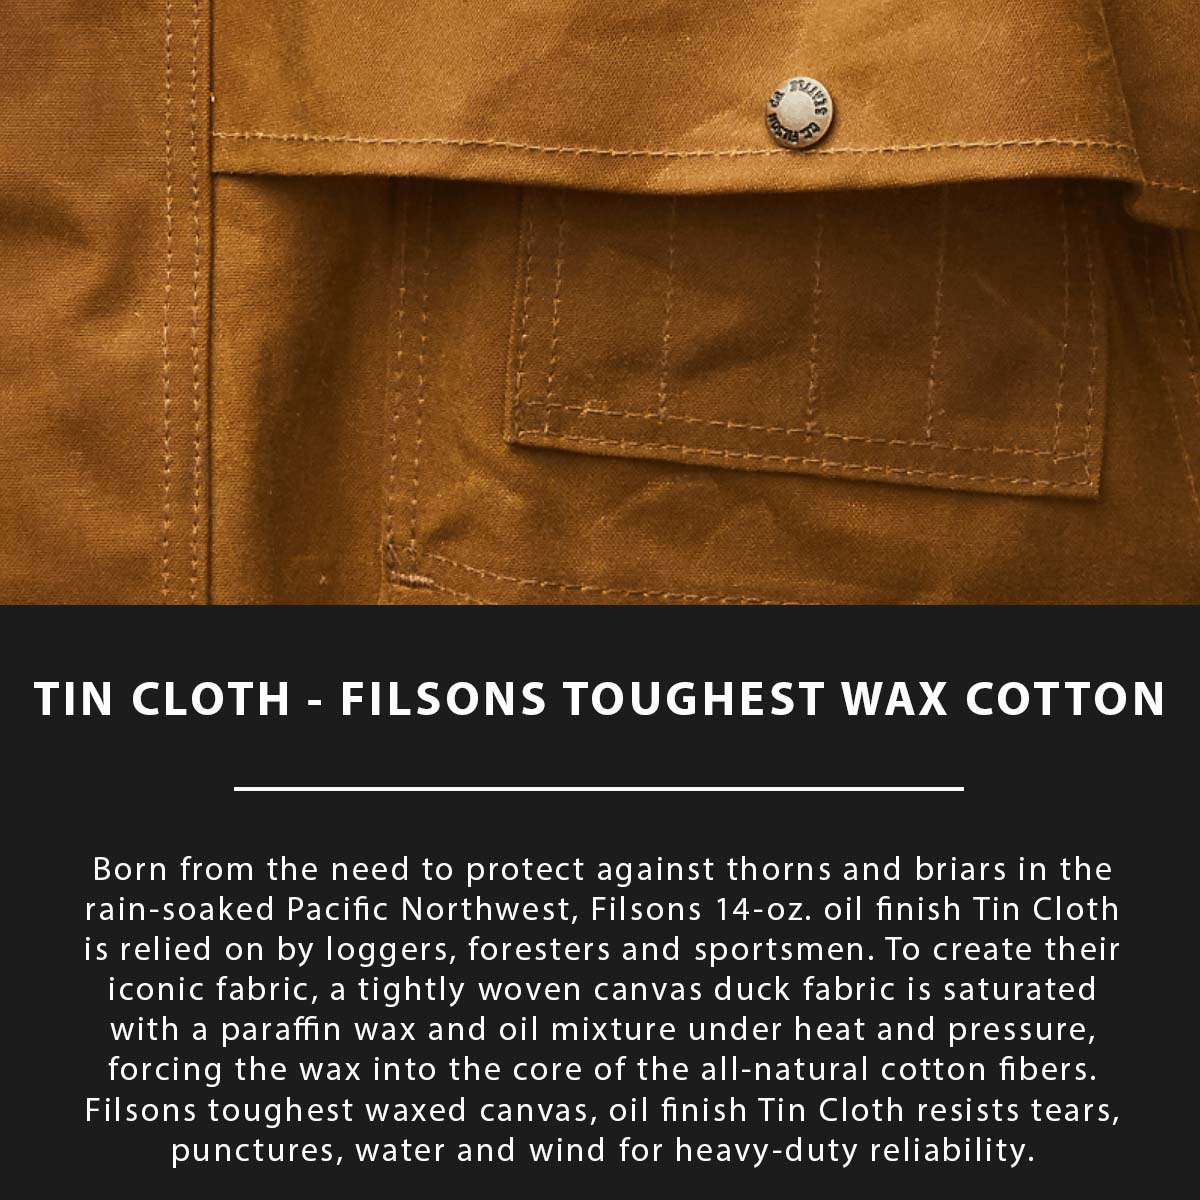 Filson Oil Tin Cloth Vest Dark Tan, made of the legendary super strong, lightweight, and oil impregnated 14-oz. Tin Cloth canvas